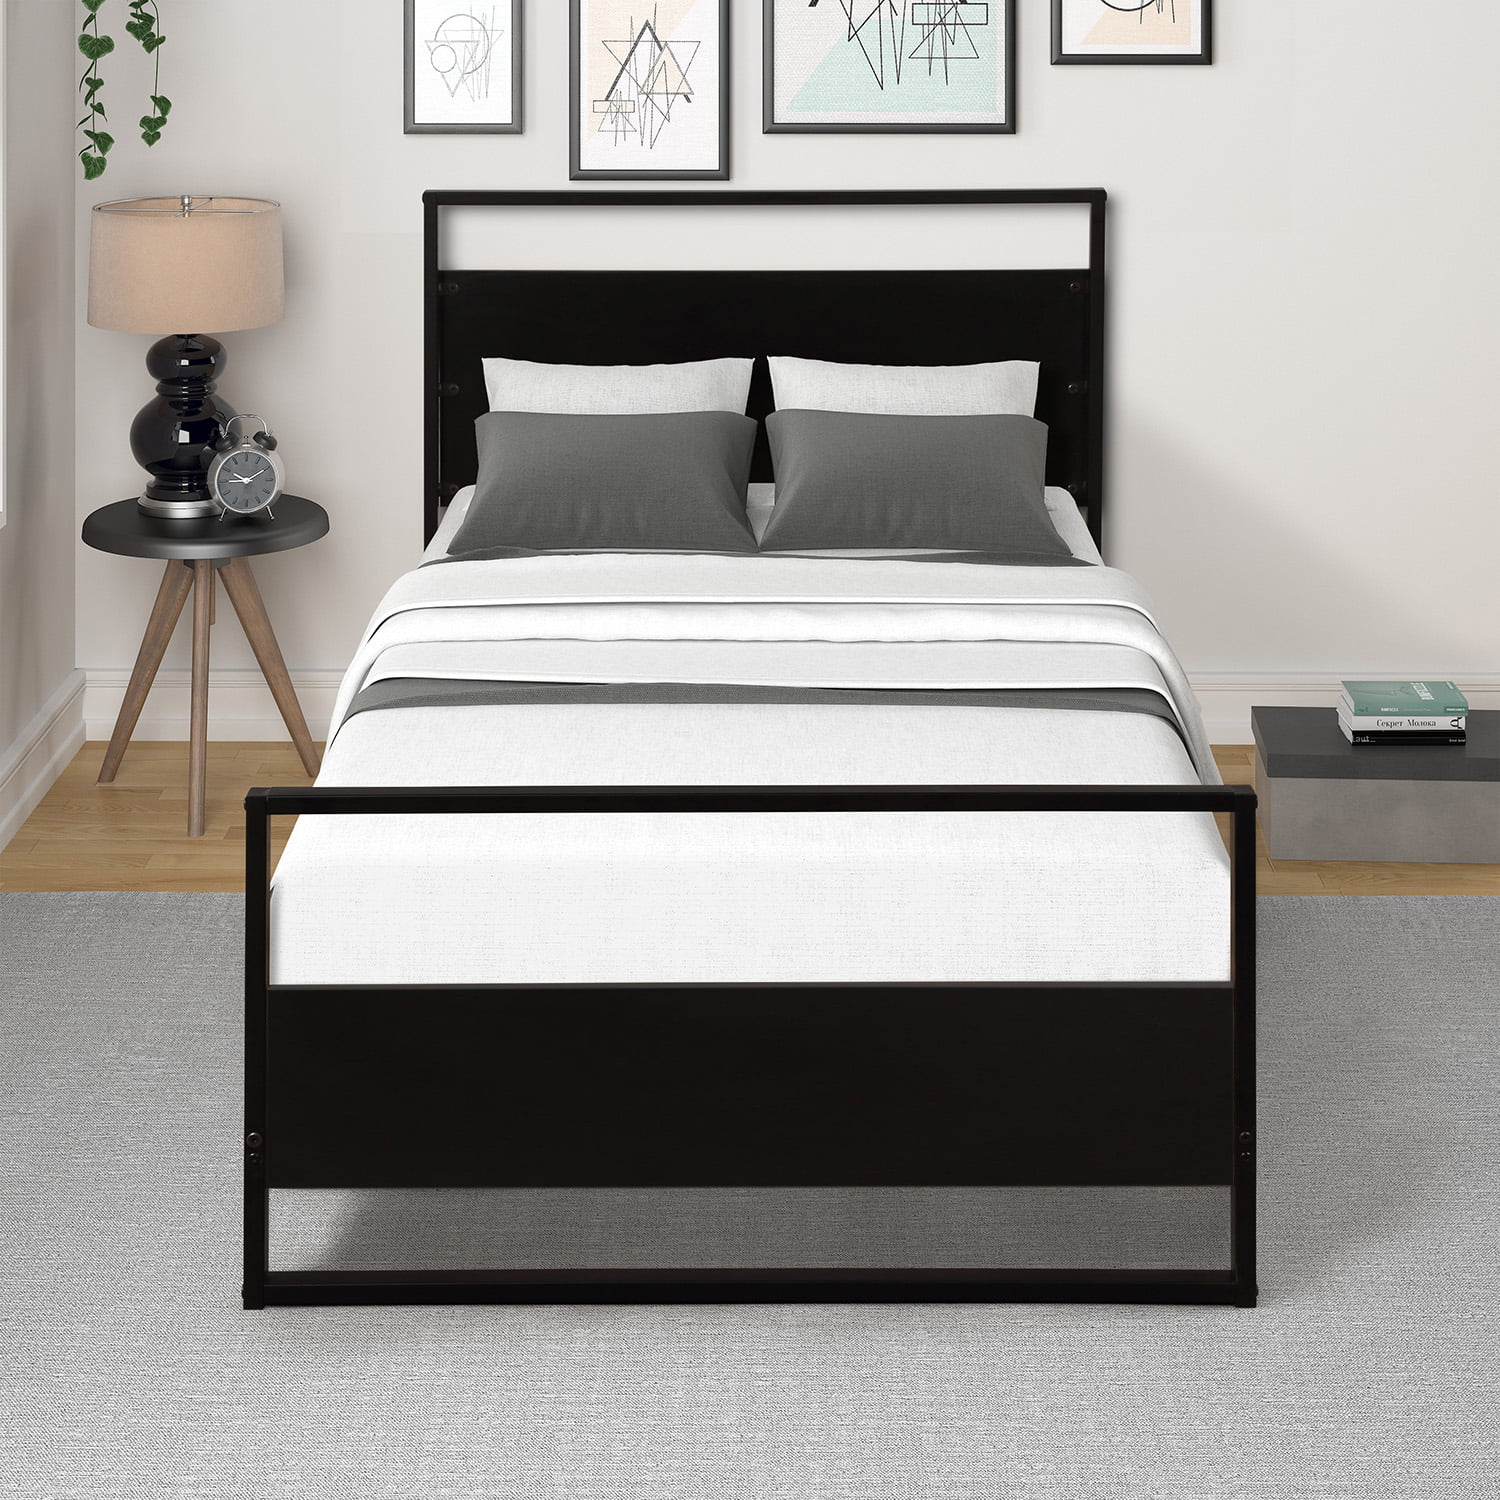 Twin Metal Bed Frame Black, Metal Twin Bed Frame With Headboard